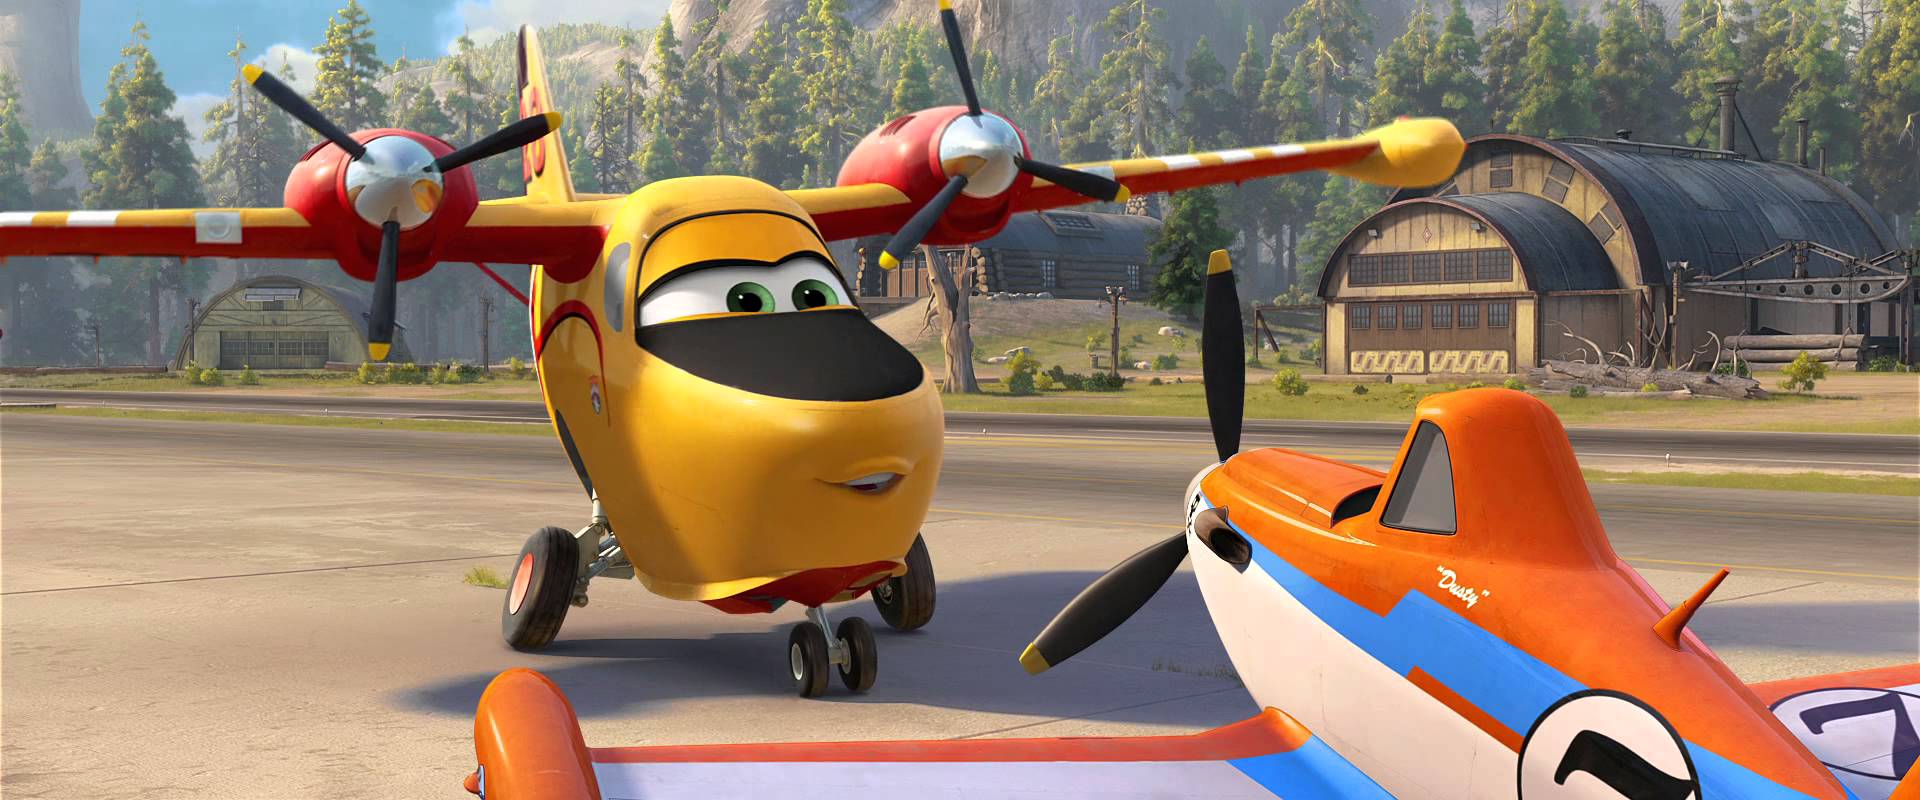 1920x800 > Planes: Fire & Rescue Wallpapers